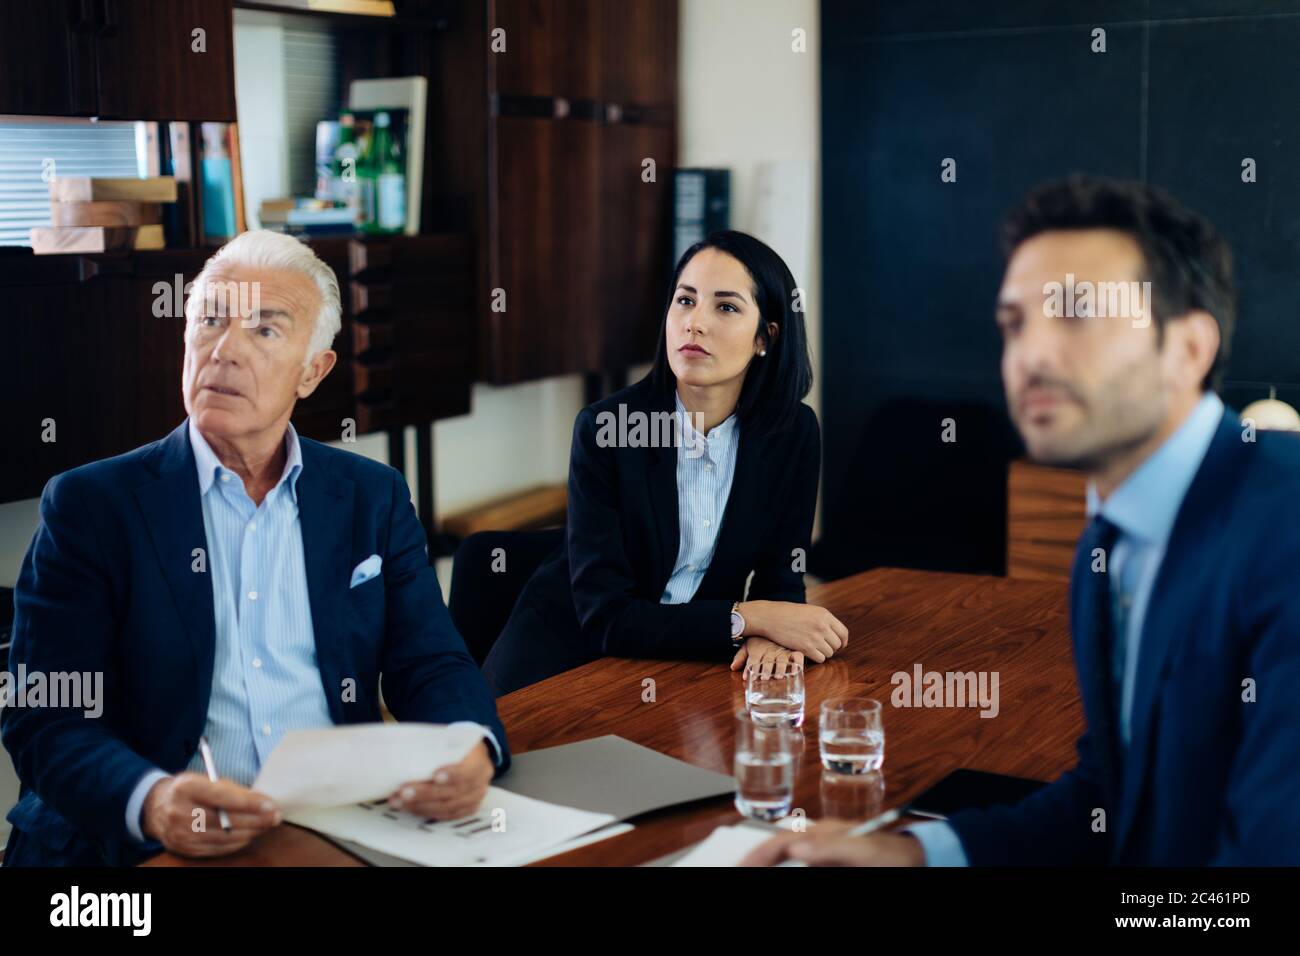 Businessmen and woman watching presentation from boardroom table Stock Photo